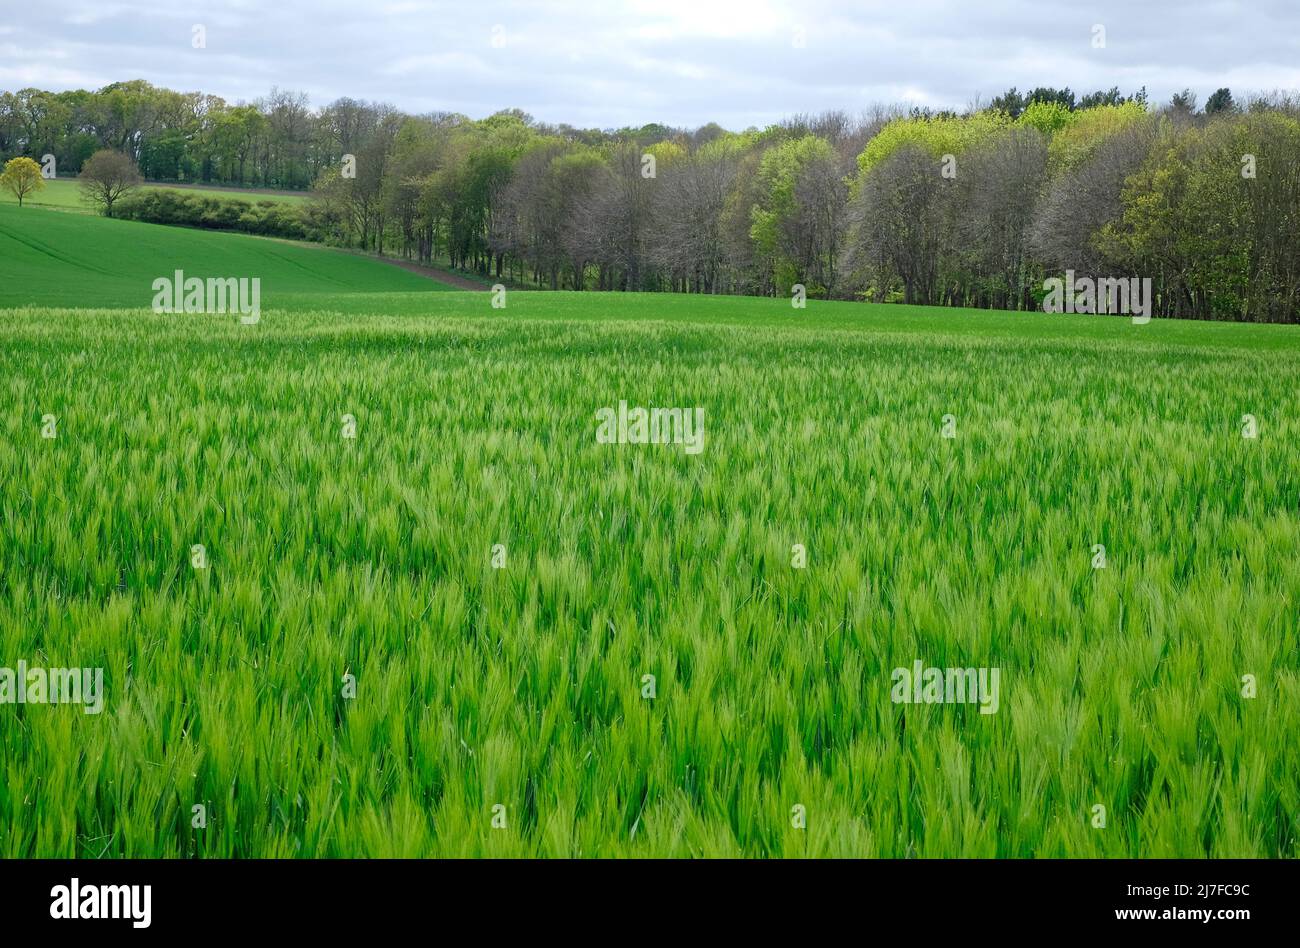 early green wheat growing in field, holt, north norfolk, england Stock Photo